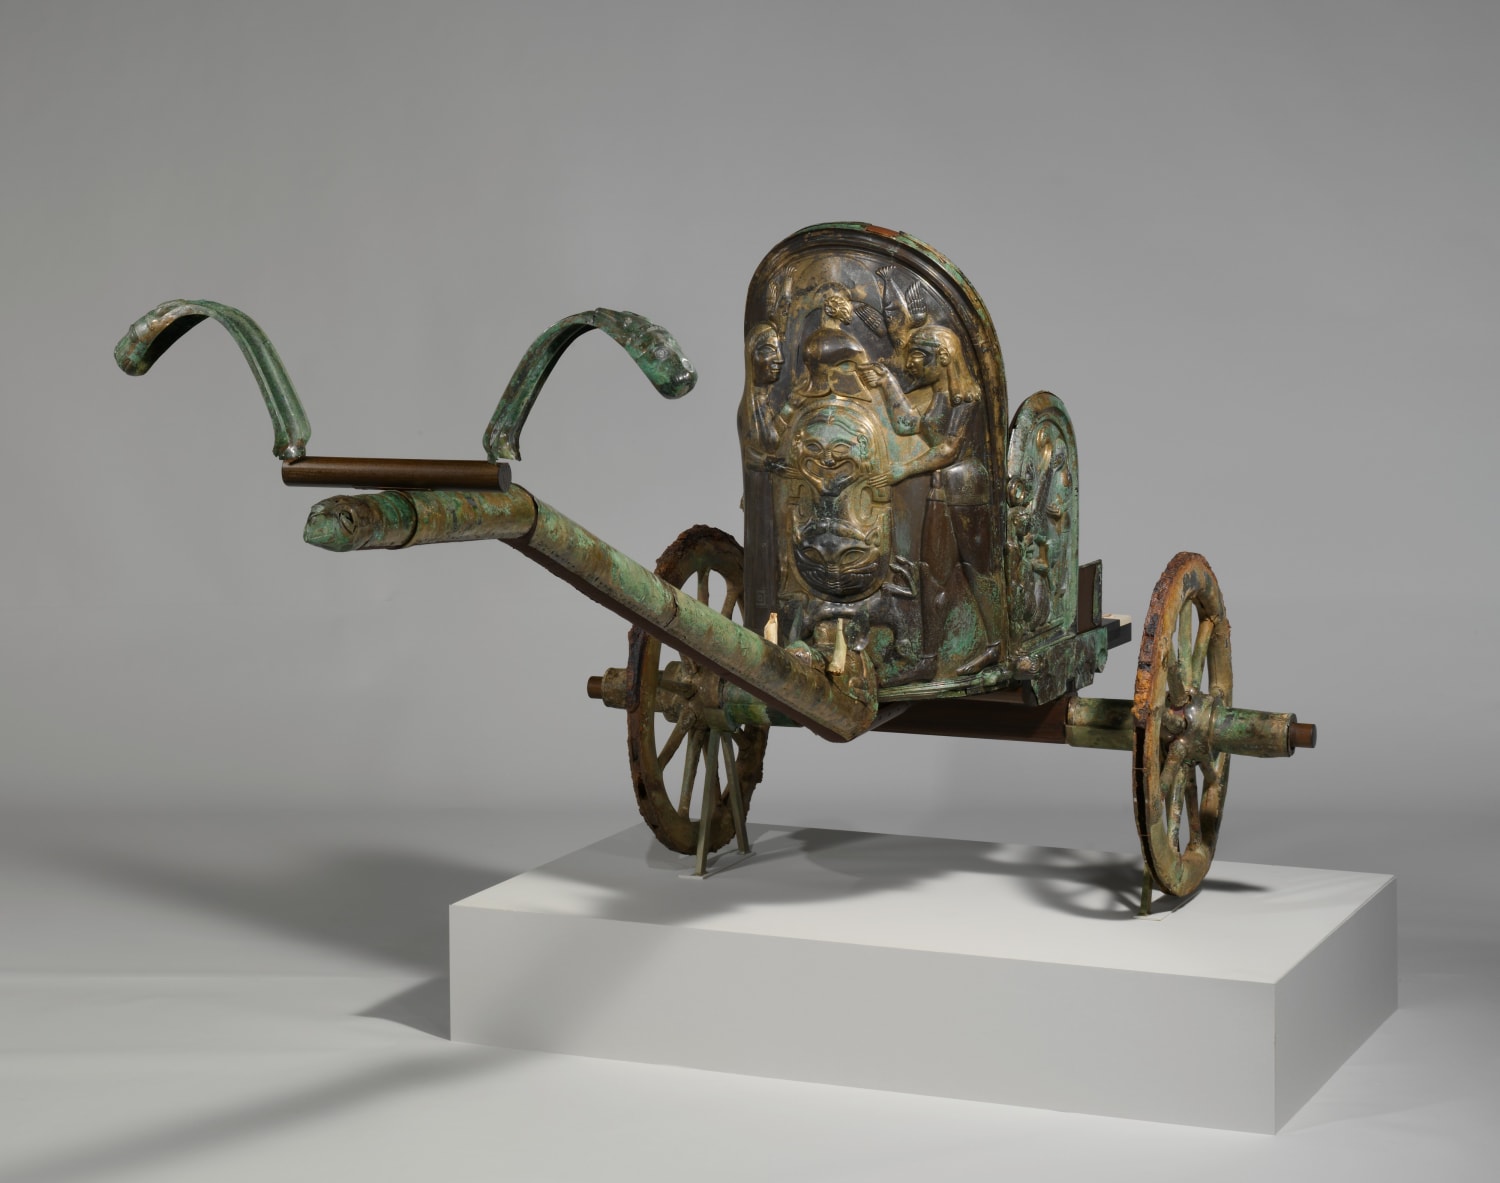 530 BC Monteleone chariot. Currently at the New York Metropolitan Museum of Art, it is one of the best-preserved surviving ancient chariots.